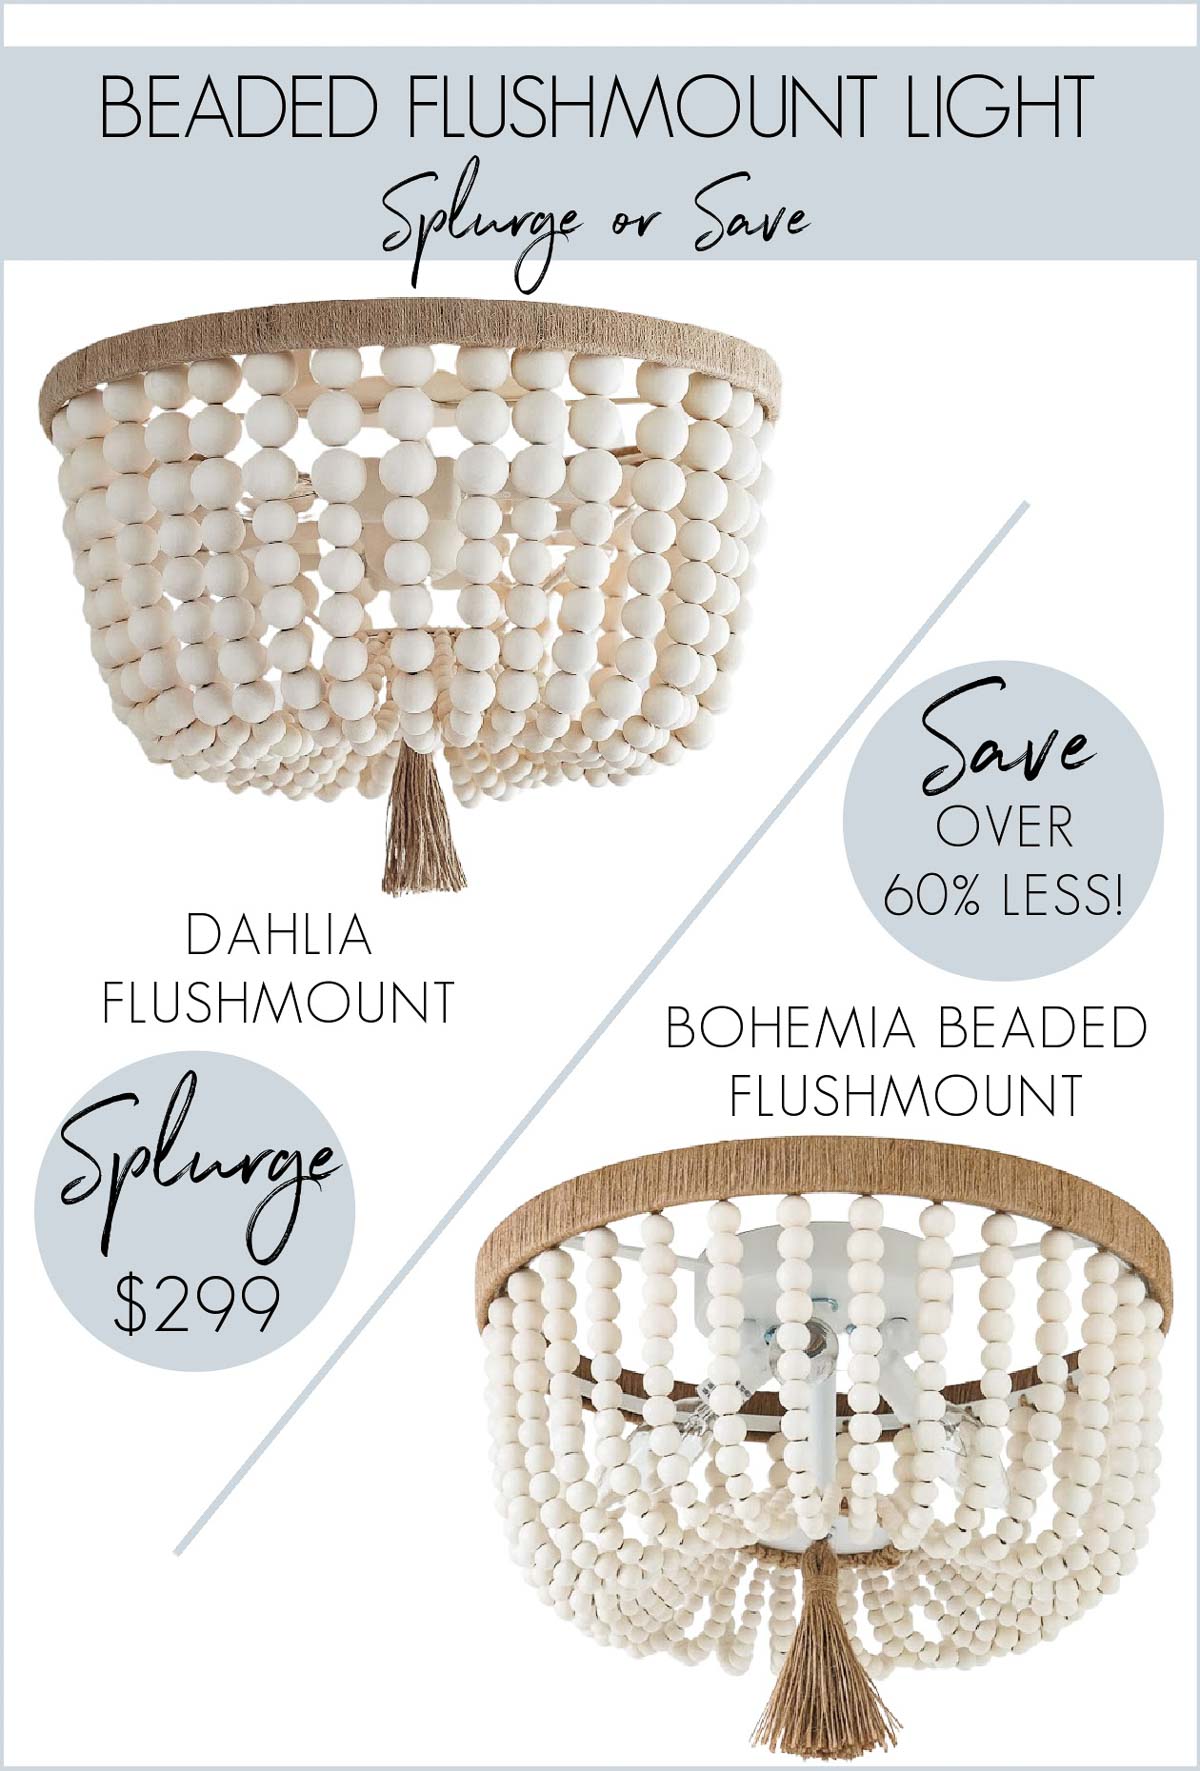 Beaded flush mount look for less - a favorite cheap home decor find!